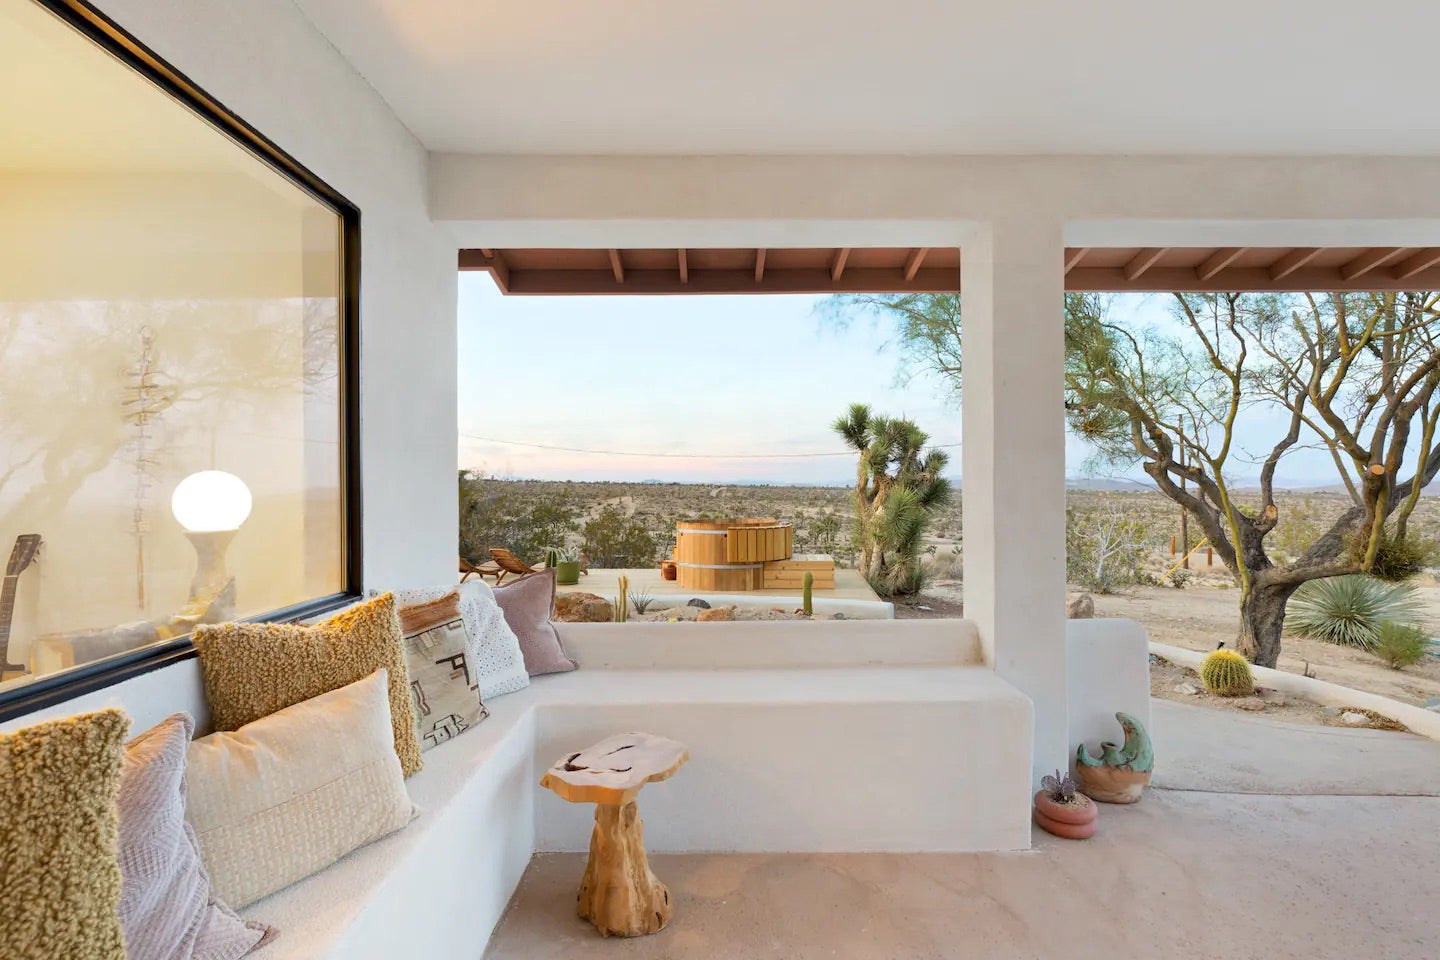 Adobe home in the Yucca Valley